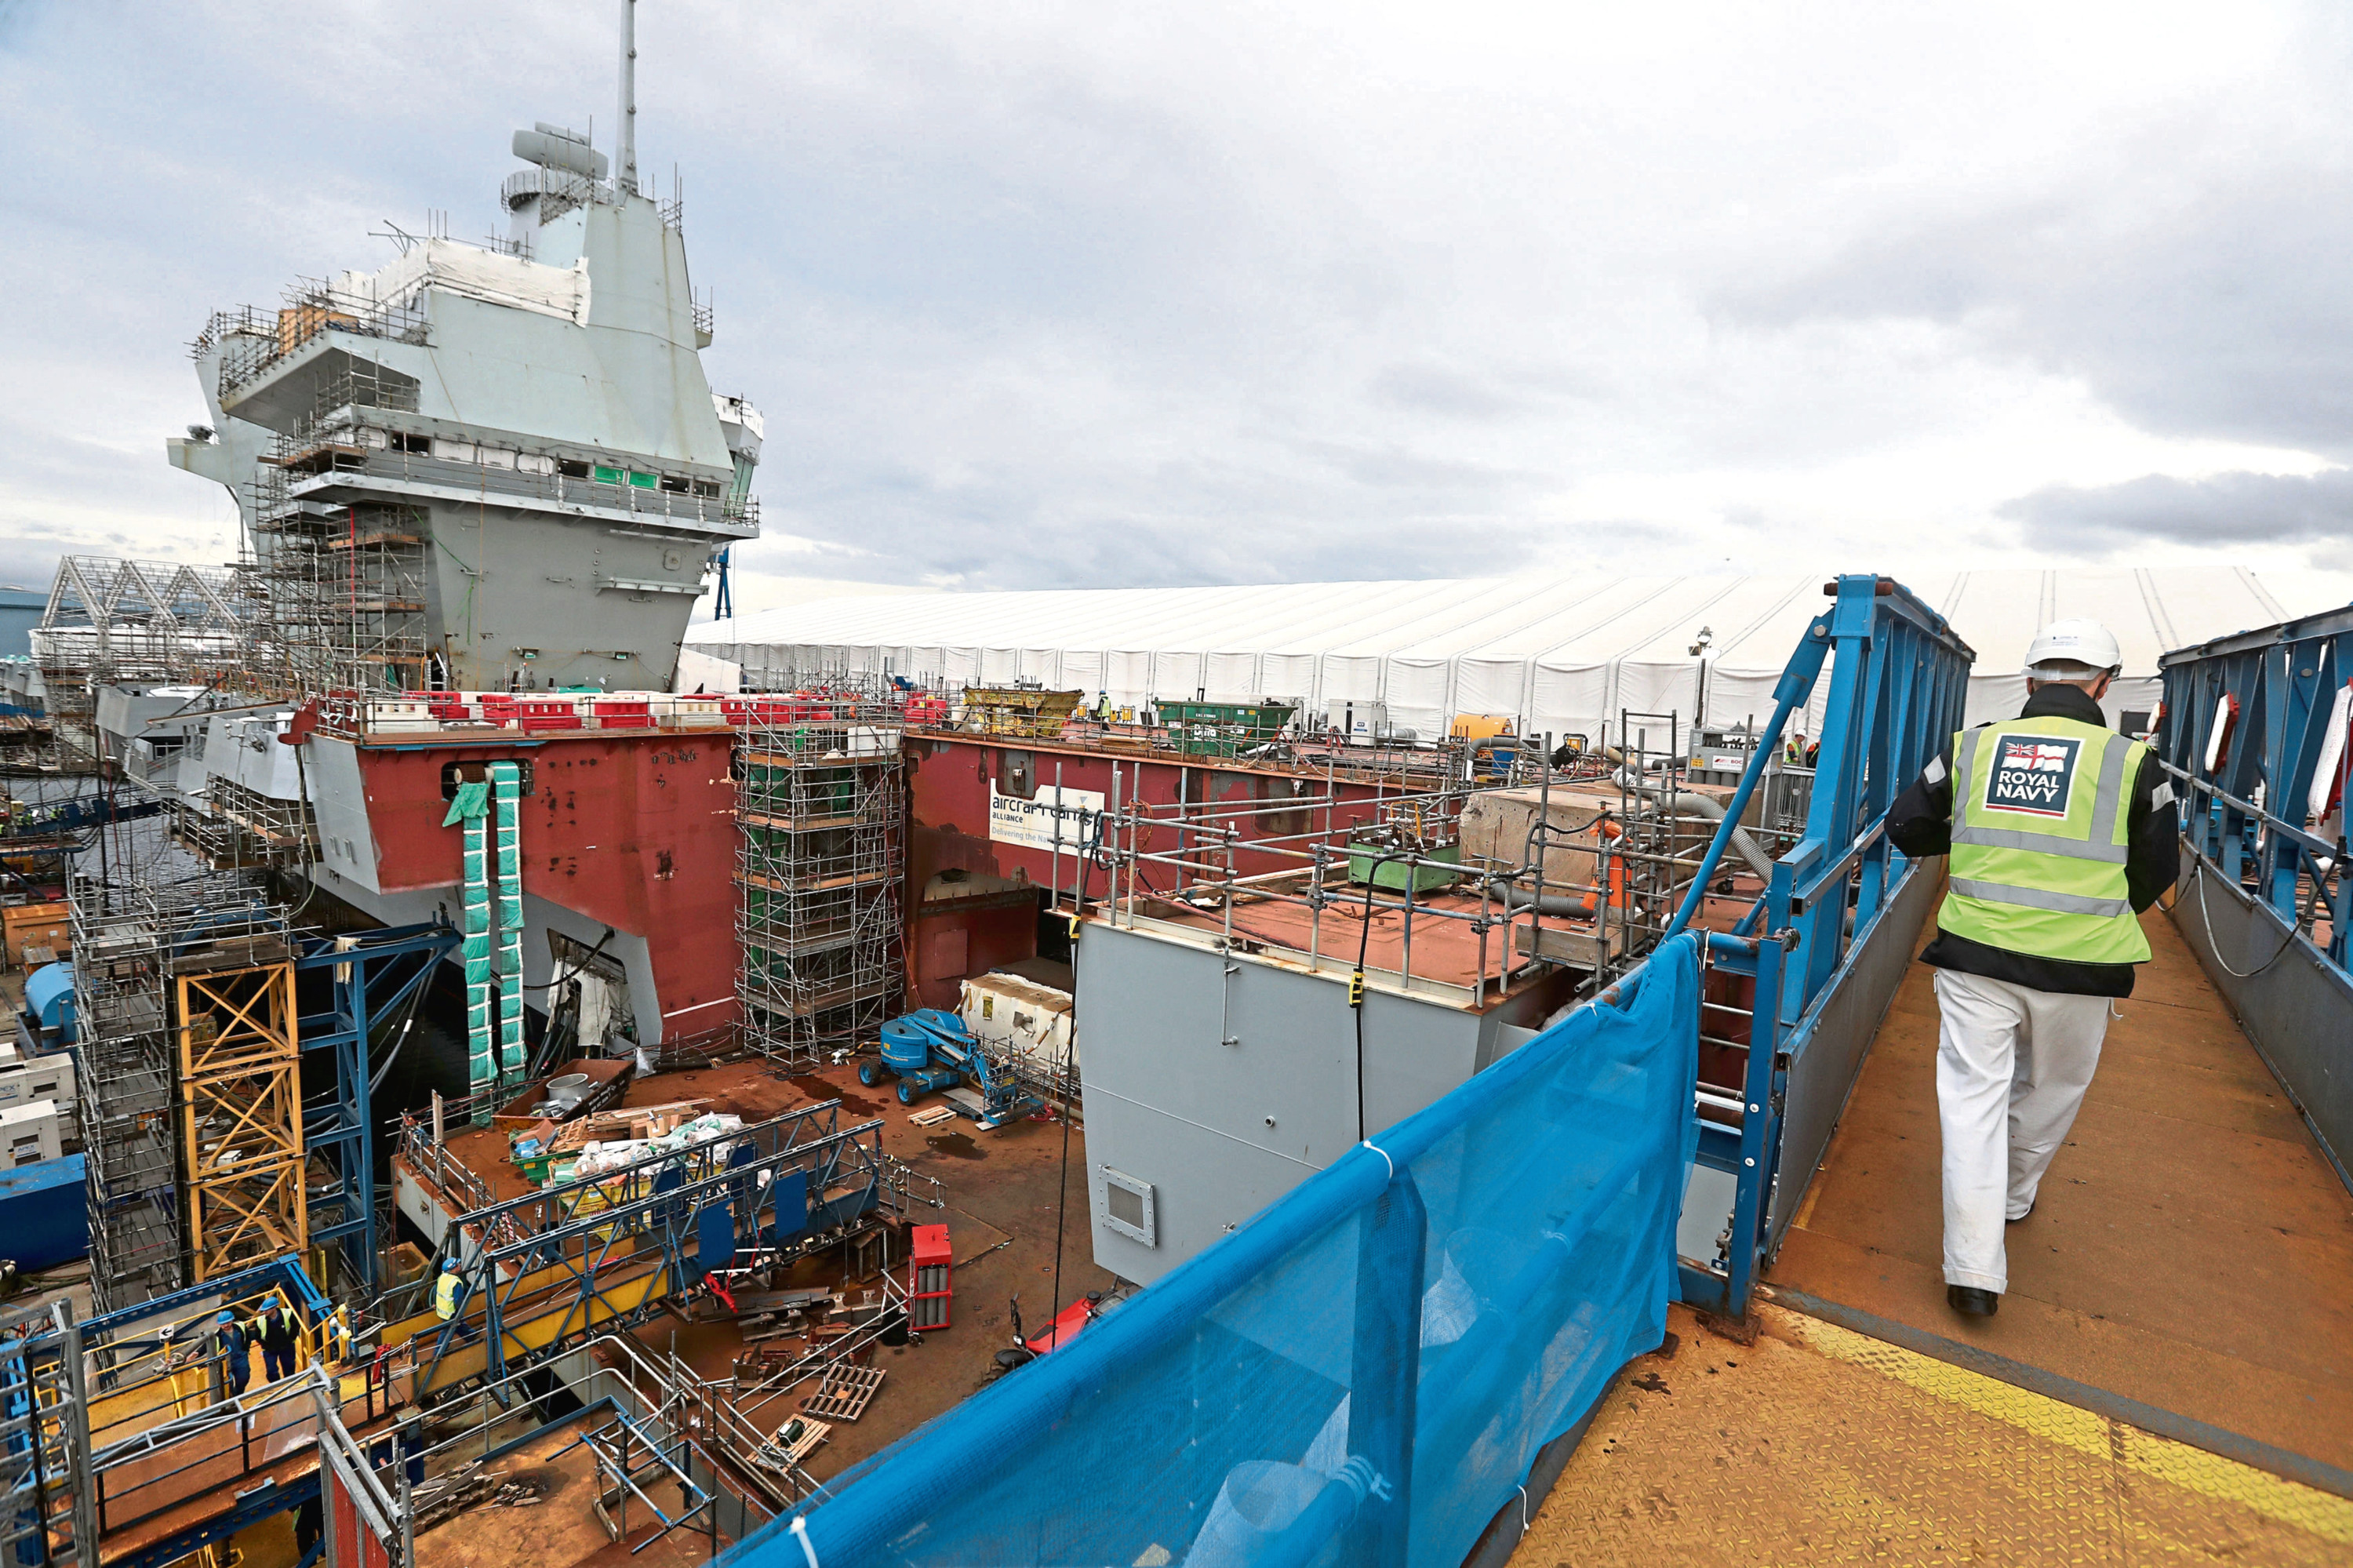 Work continues during a tour of the under-construction aircraft carrier, HMS Prince of Wales, at Babcock's site in Rosyth, Fife.